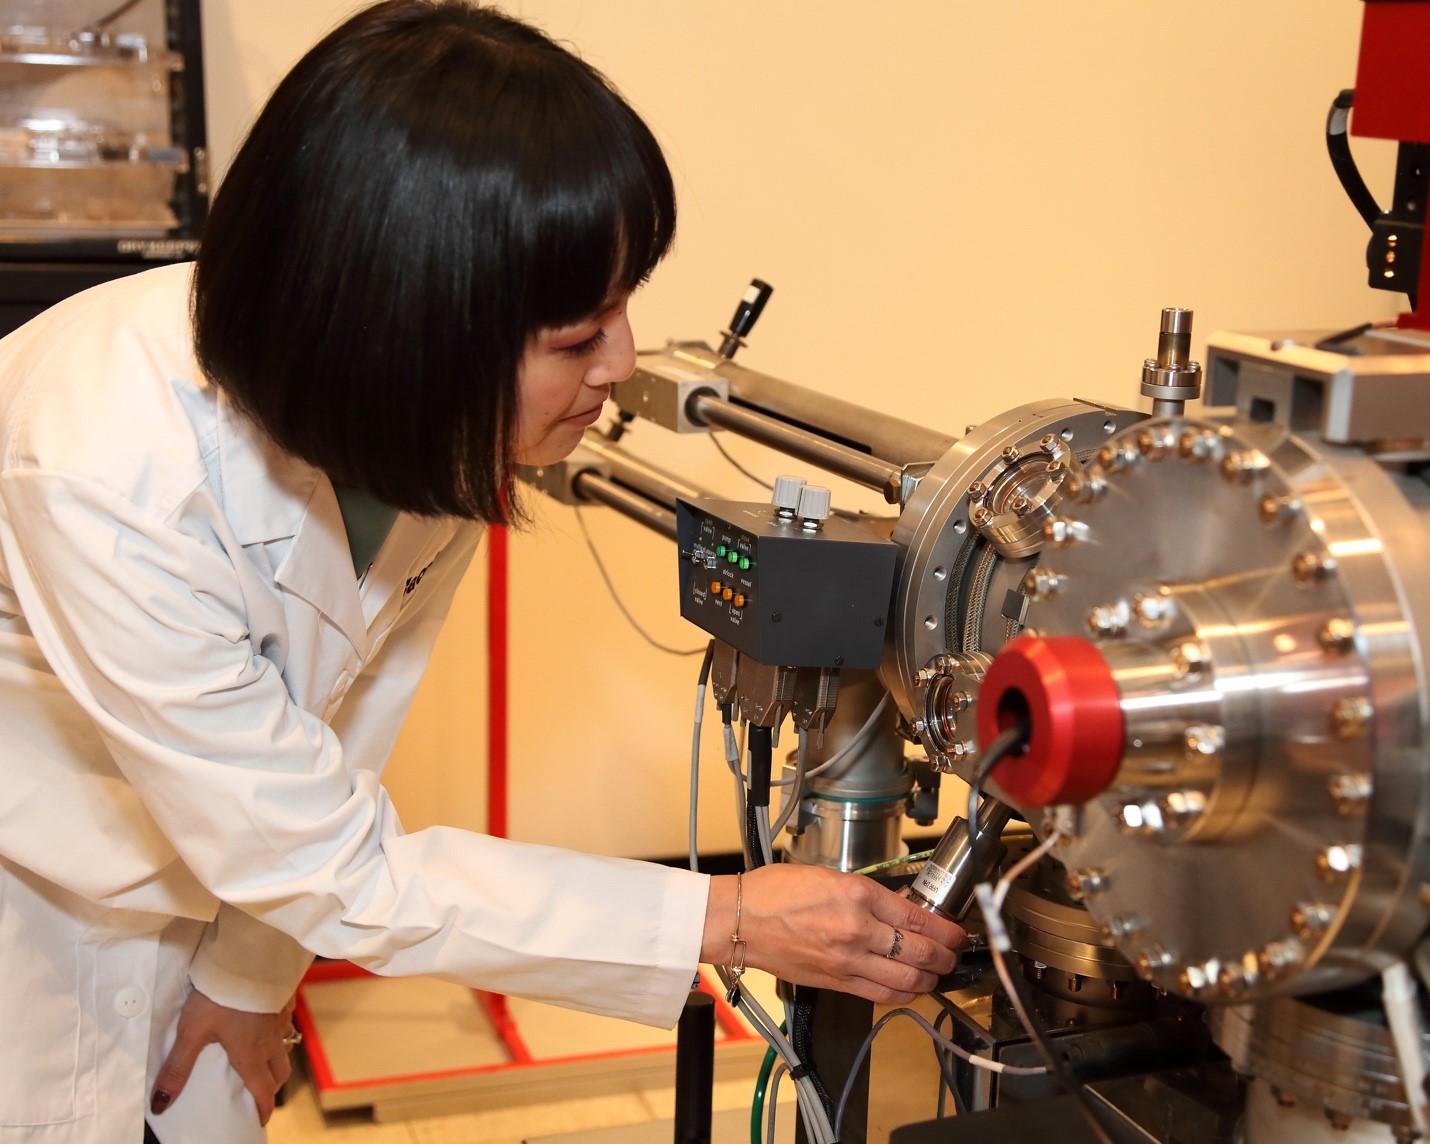 The Cameca NanoSIMS 50L in Action: Research scientist Ann Nguyen adjusts the Cs source position before conducting analyses on precious astromaterials. 
					Spatial resolutions down to 50 nm can be achieved with this primary ion beam source.